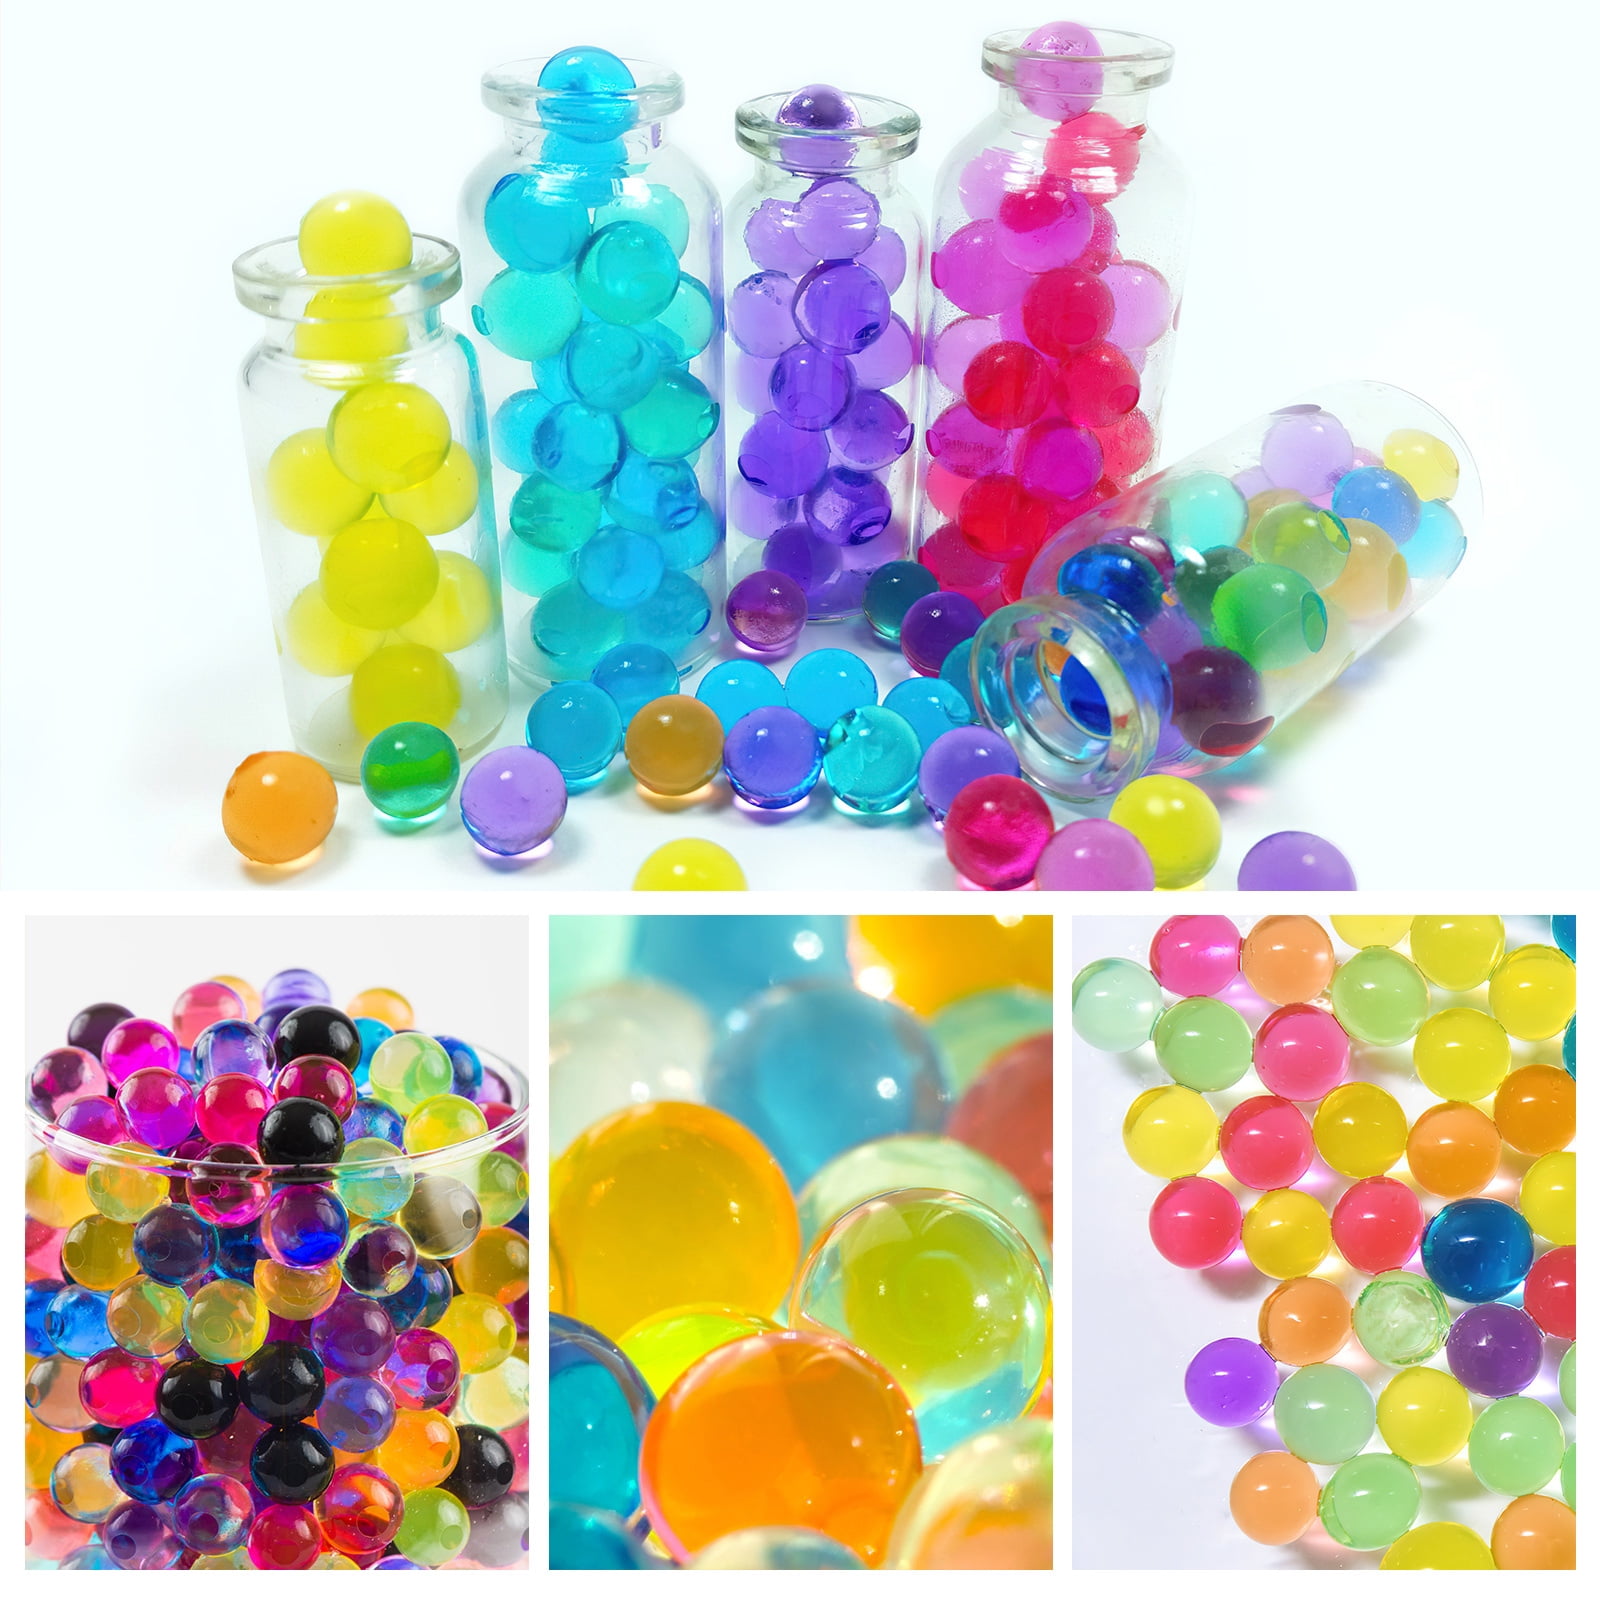  Inbagi 100,000 Pieces Gel Water Beads Vase Filler Beads Crystal  Water Growing Balls for Vases Jelly Balls for Floral Candle Pearls Wedding  Centerpiece (Blue White Mix) : Home & Kitchen